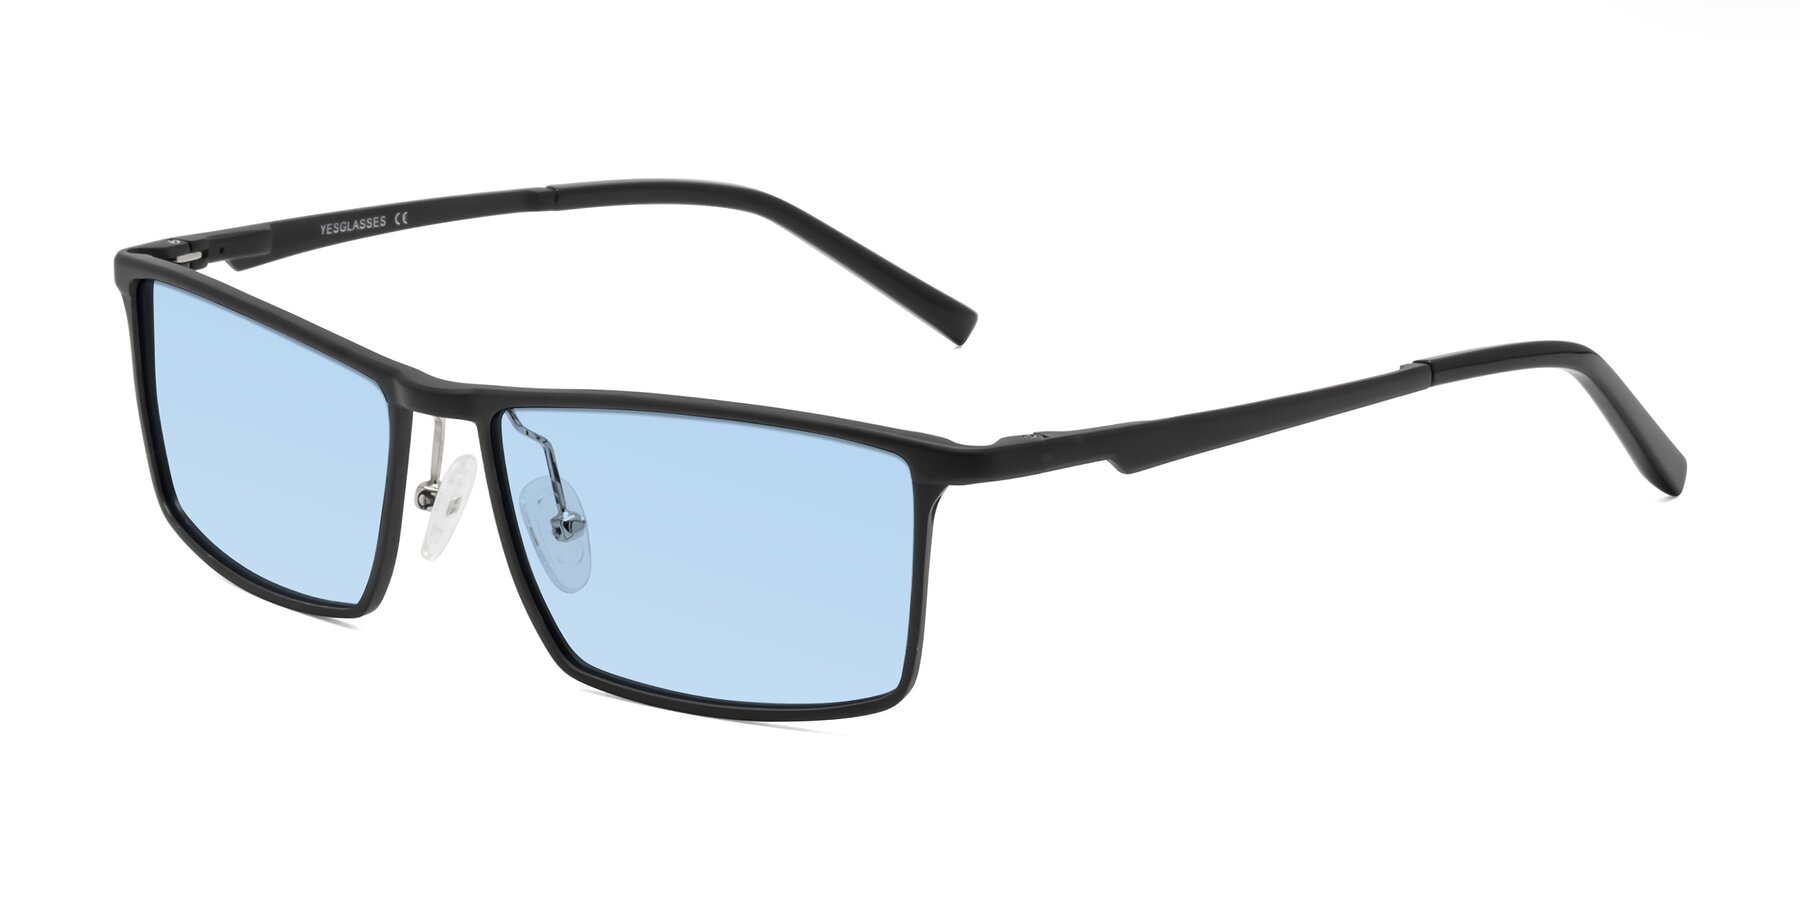 Angle of CX6330 in Black with Light Blue Tinted Lenses